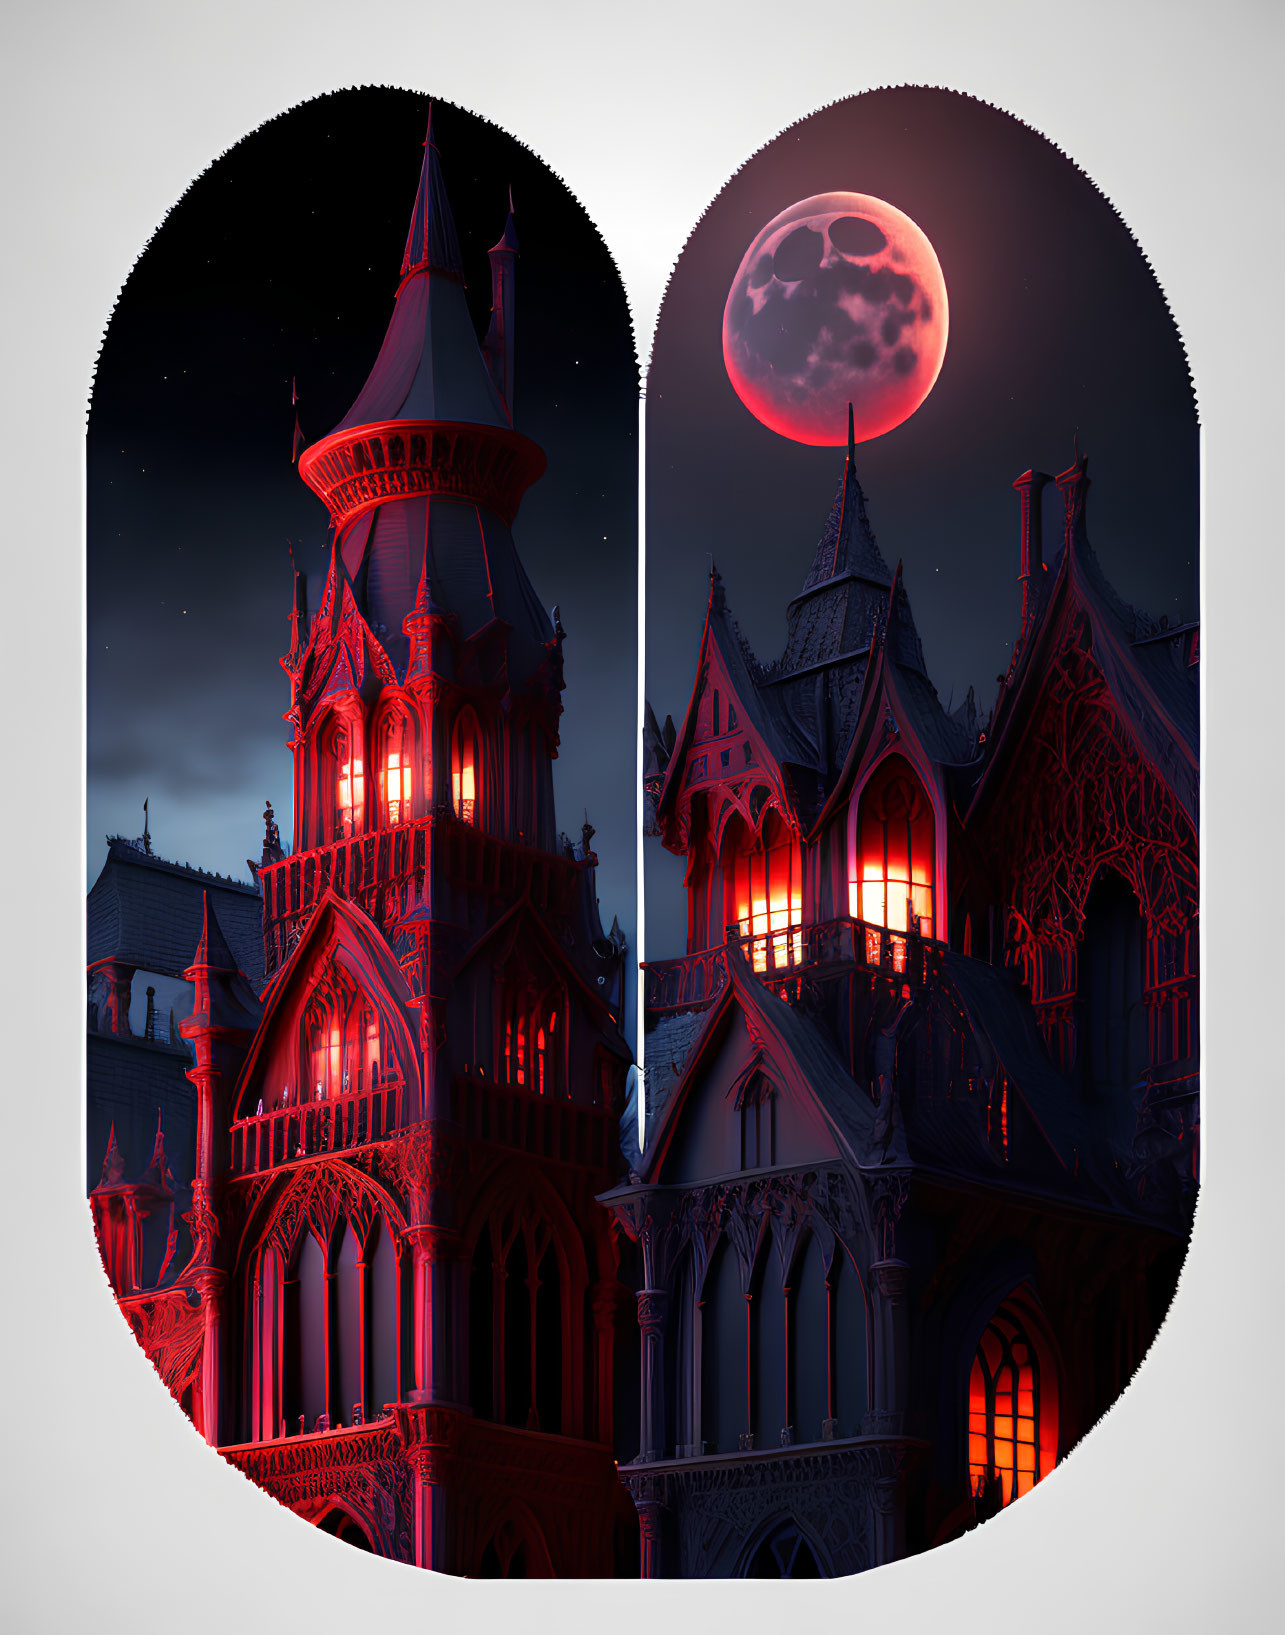 Gothic castle at night with illuminated windows under moonlit sky in rounded frame